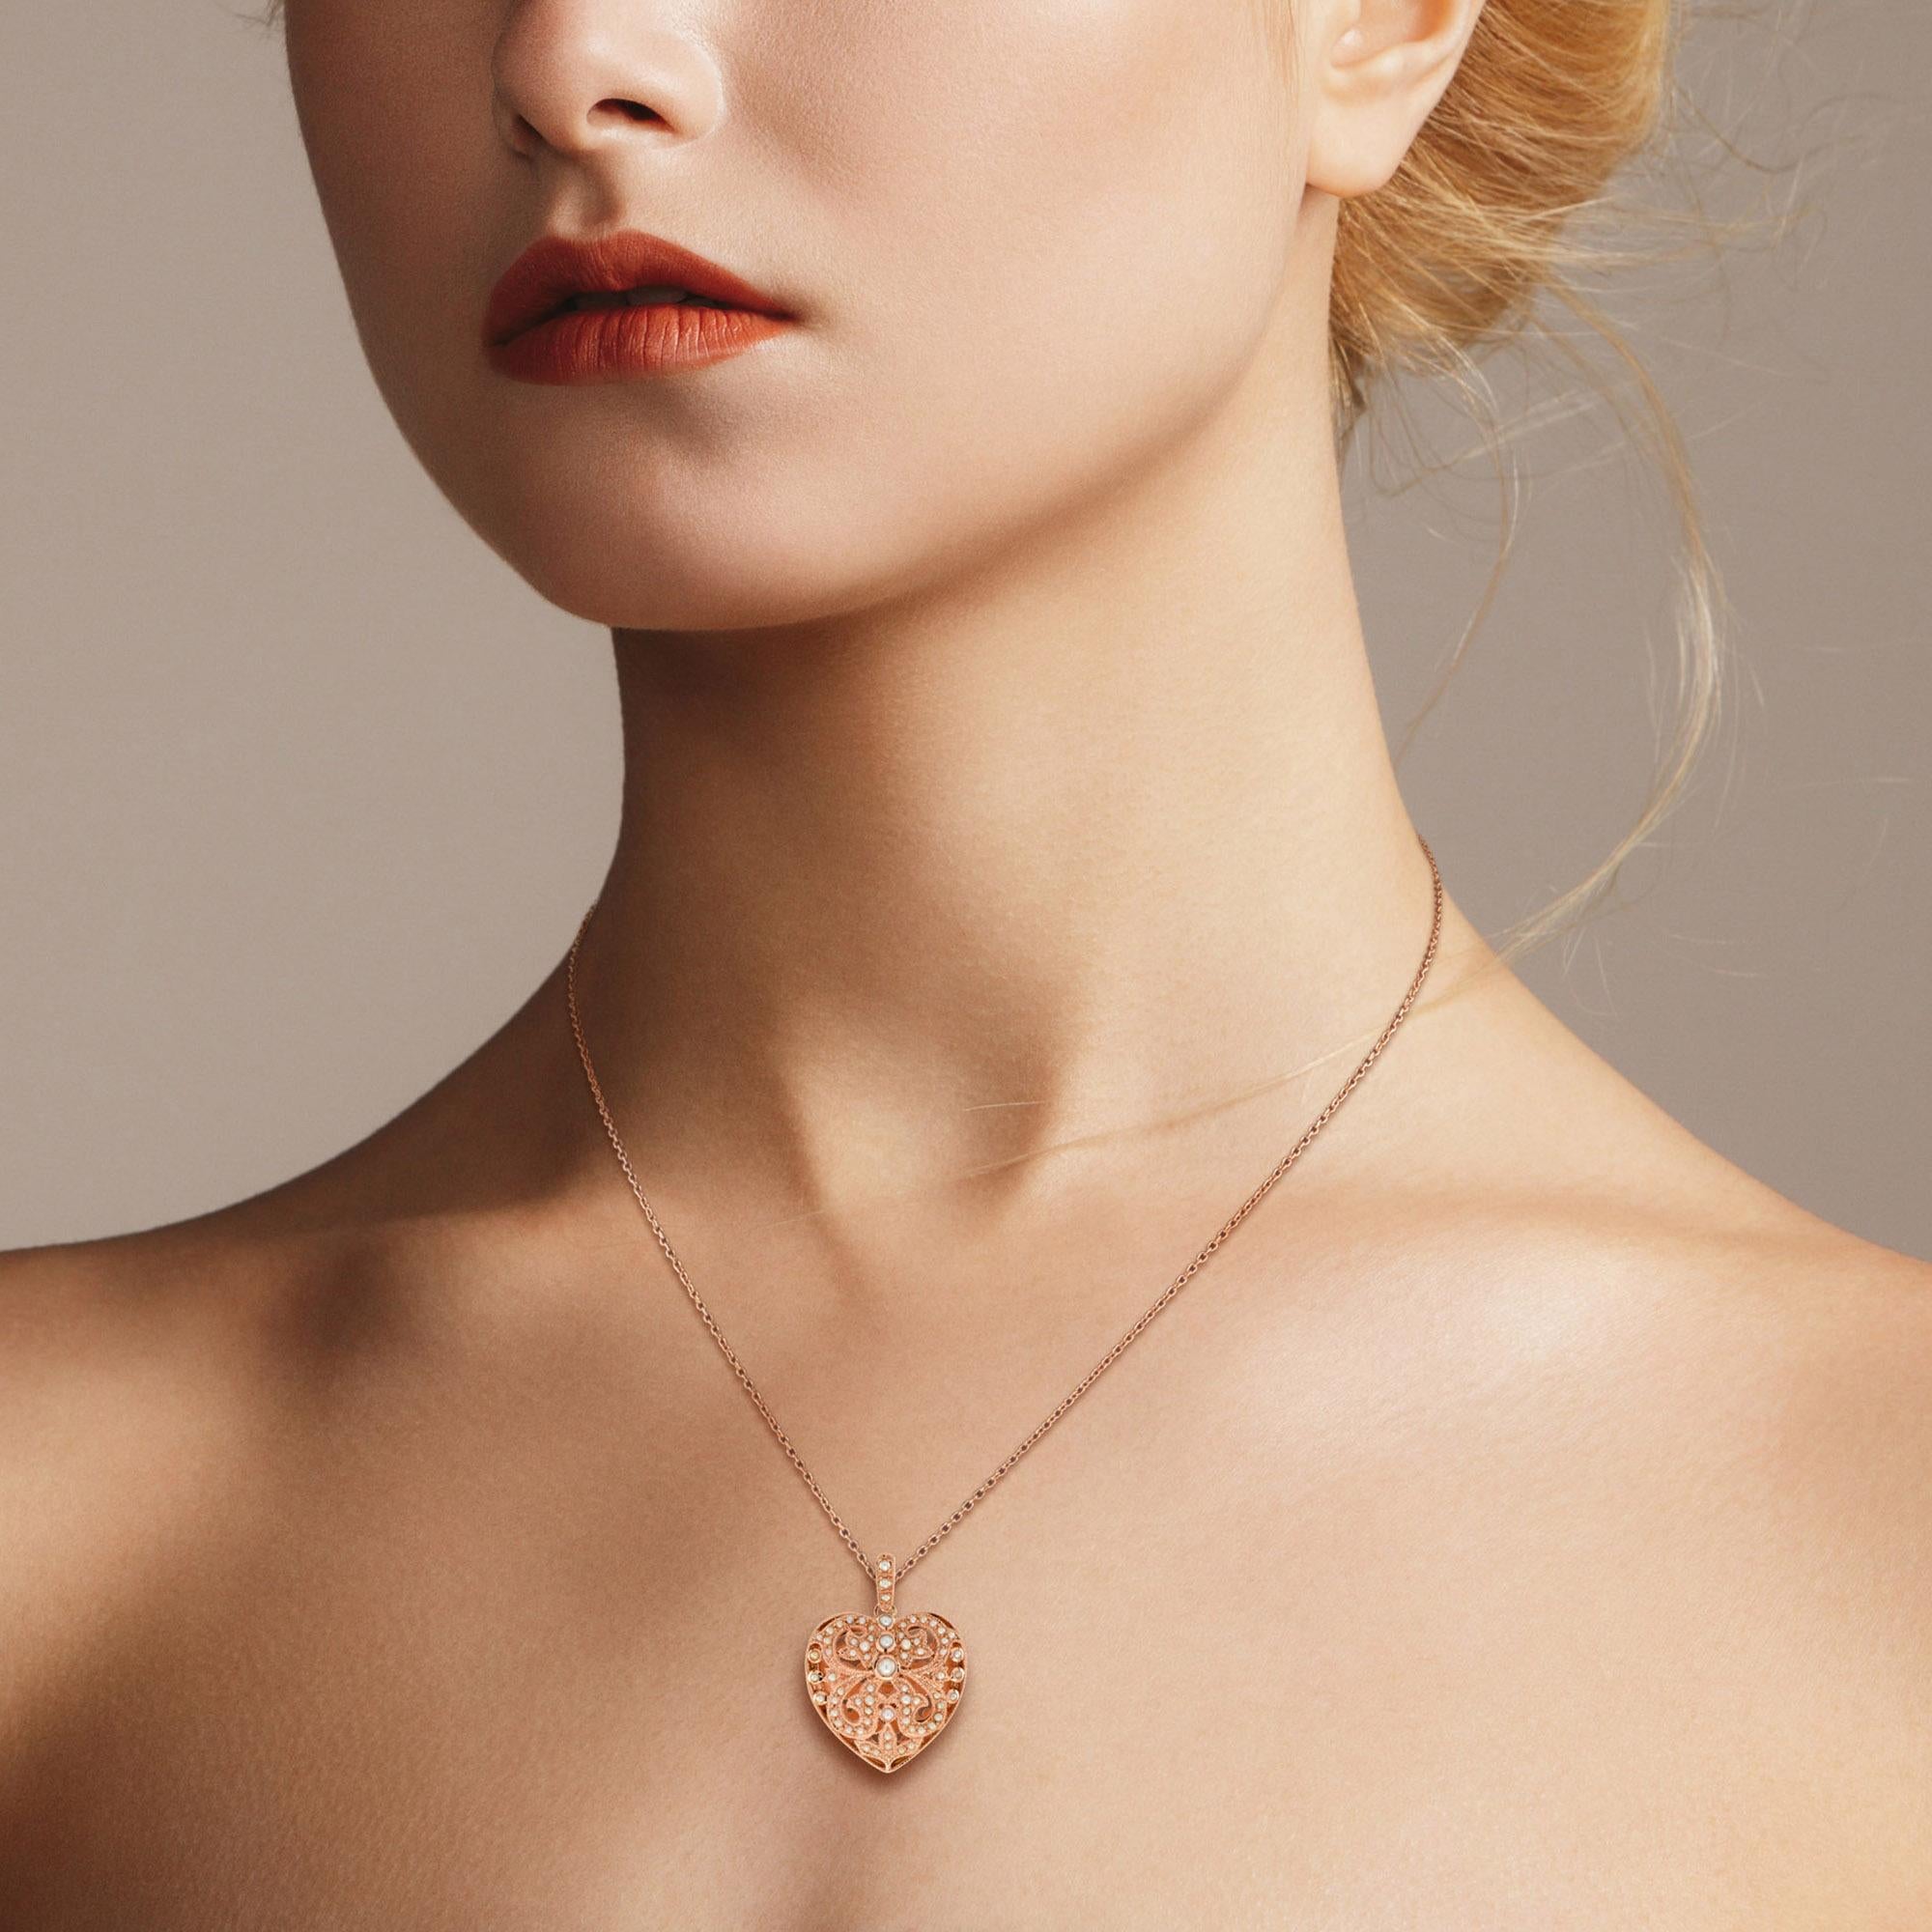 This vintage style pearl heart pendant is so sweet. The filigree heart represents the intricacies of emotions and the elegance of sentiment. The pendant is dotted all oval with 69 seed pearls on rose gold filigree setting. Wear this filigree heart